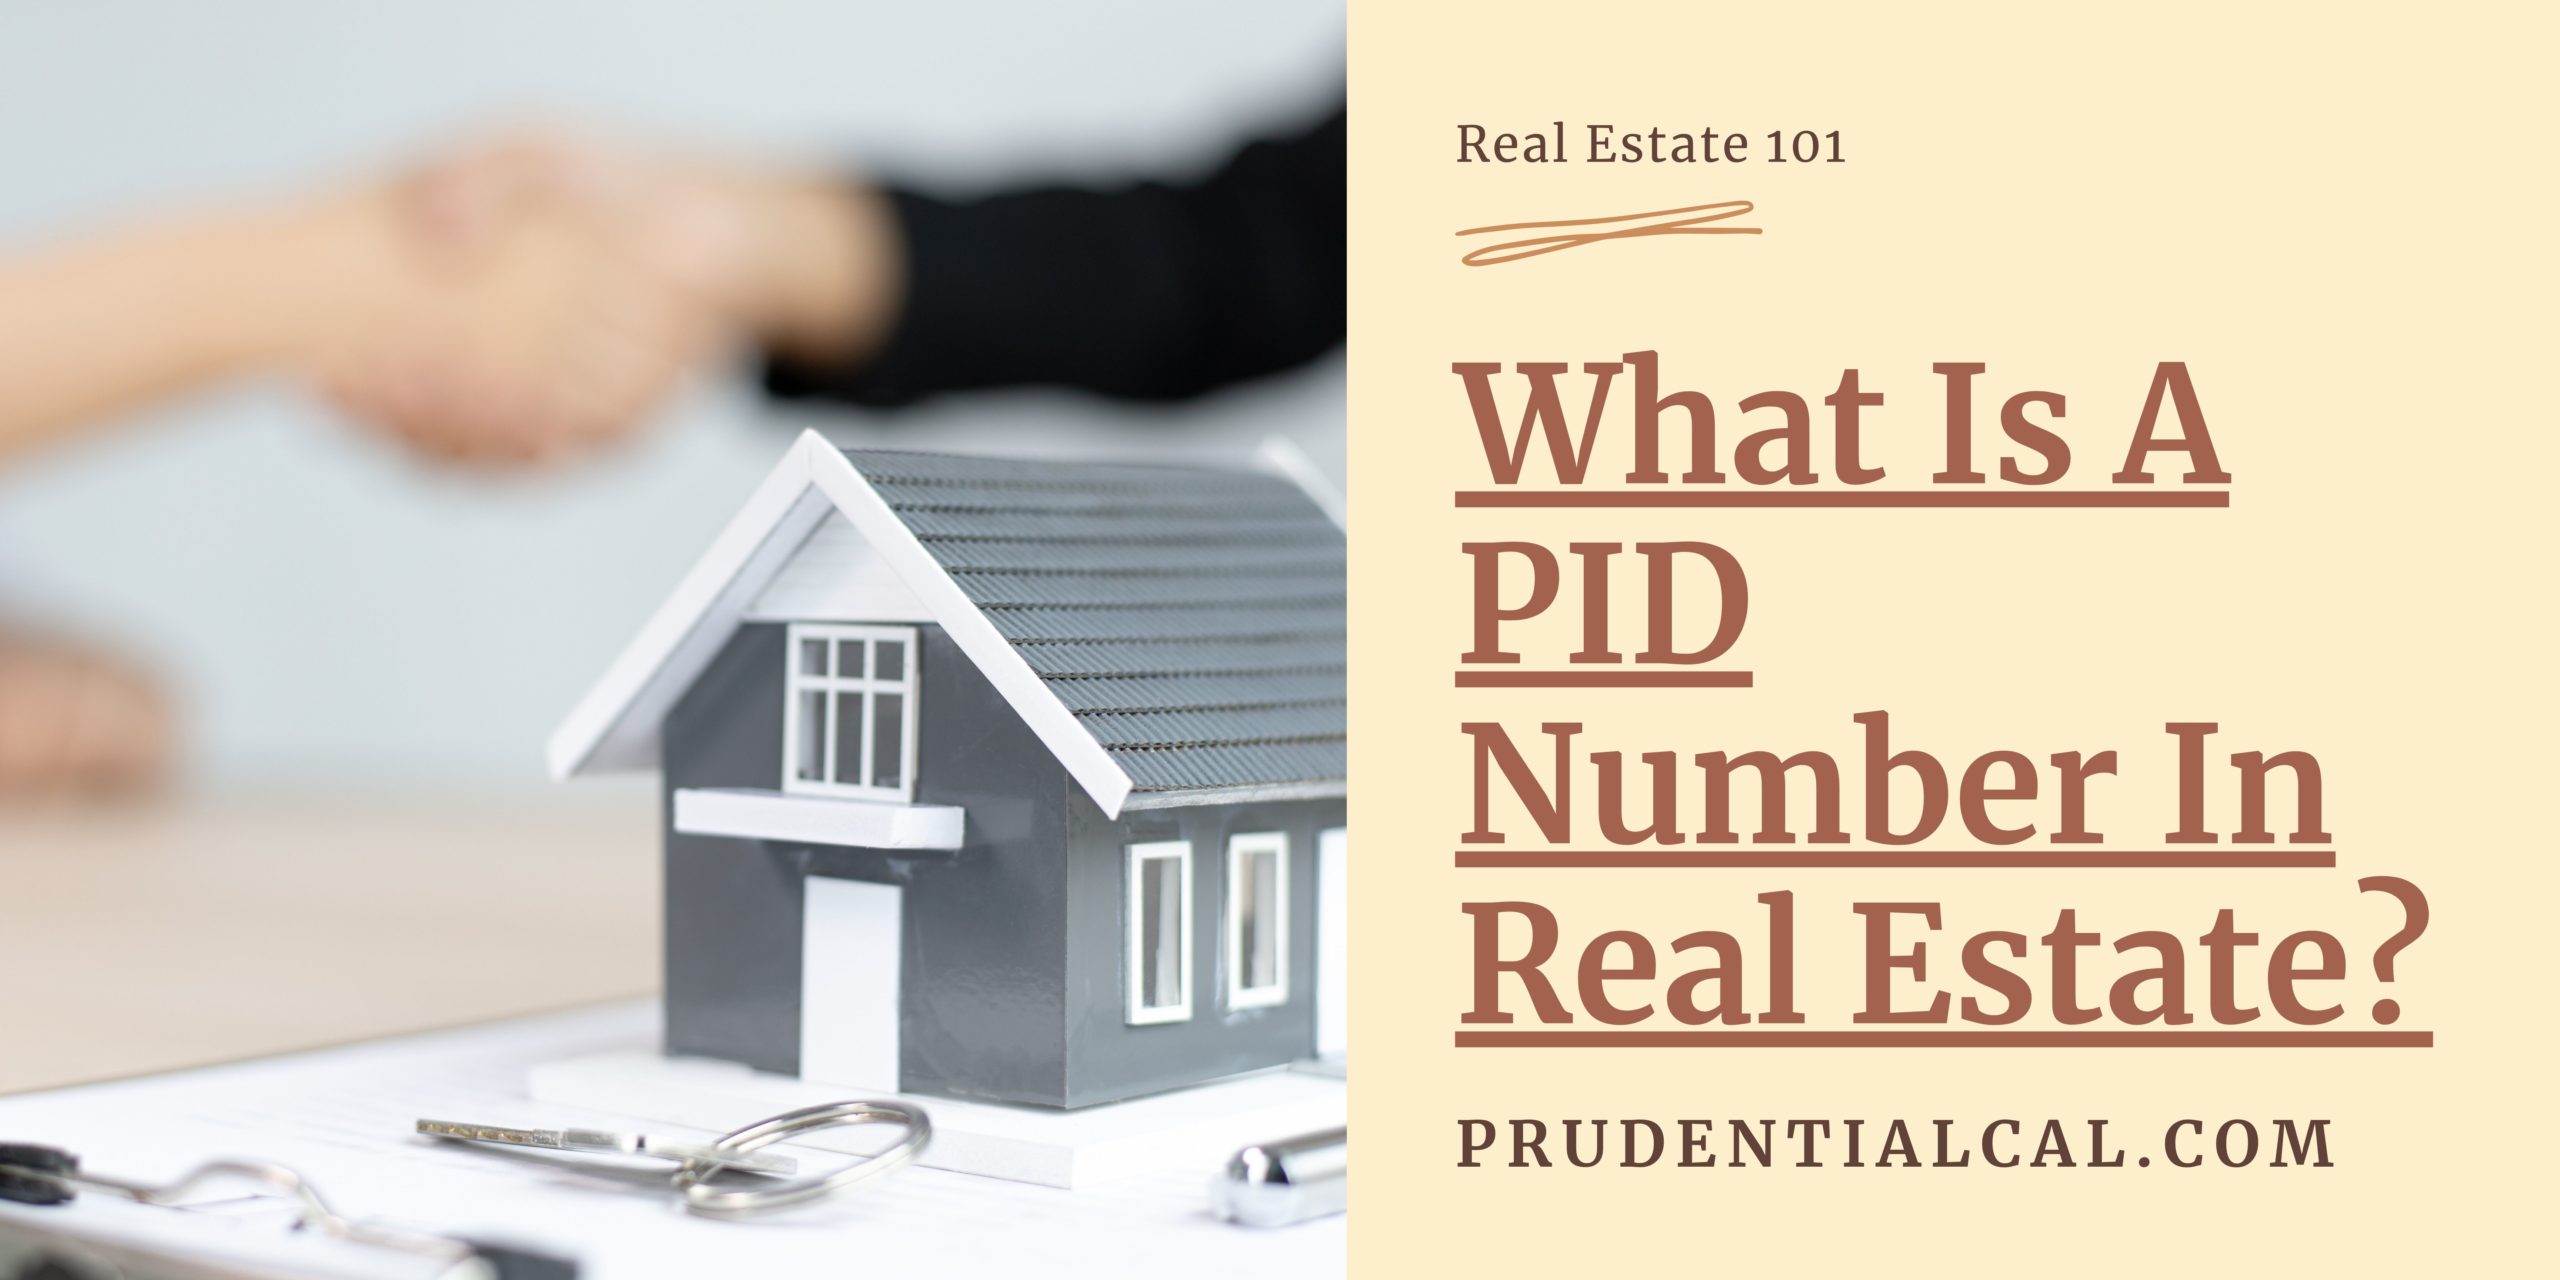 What Is A PID Number In Real Estate?